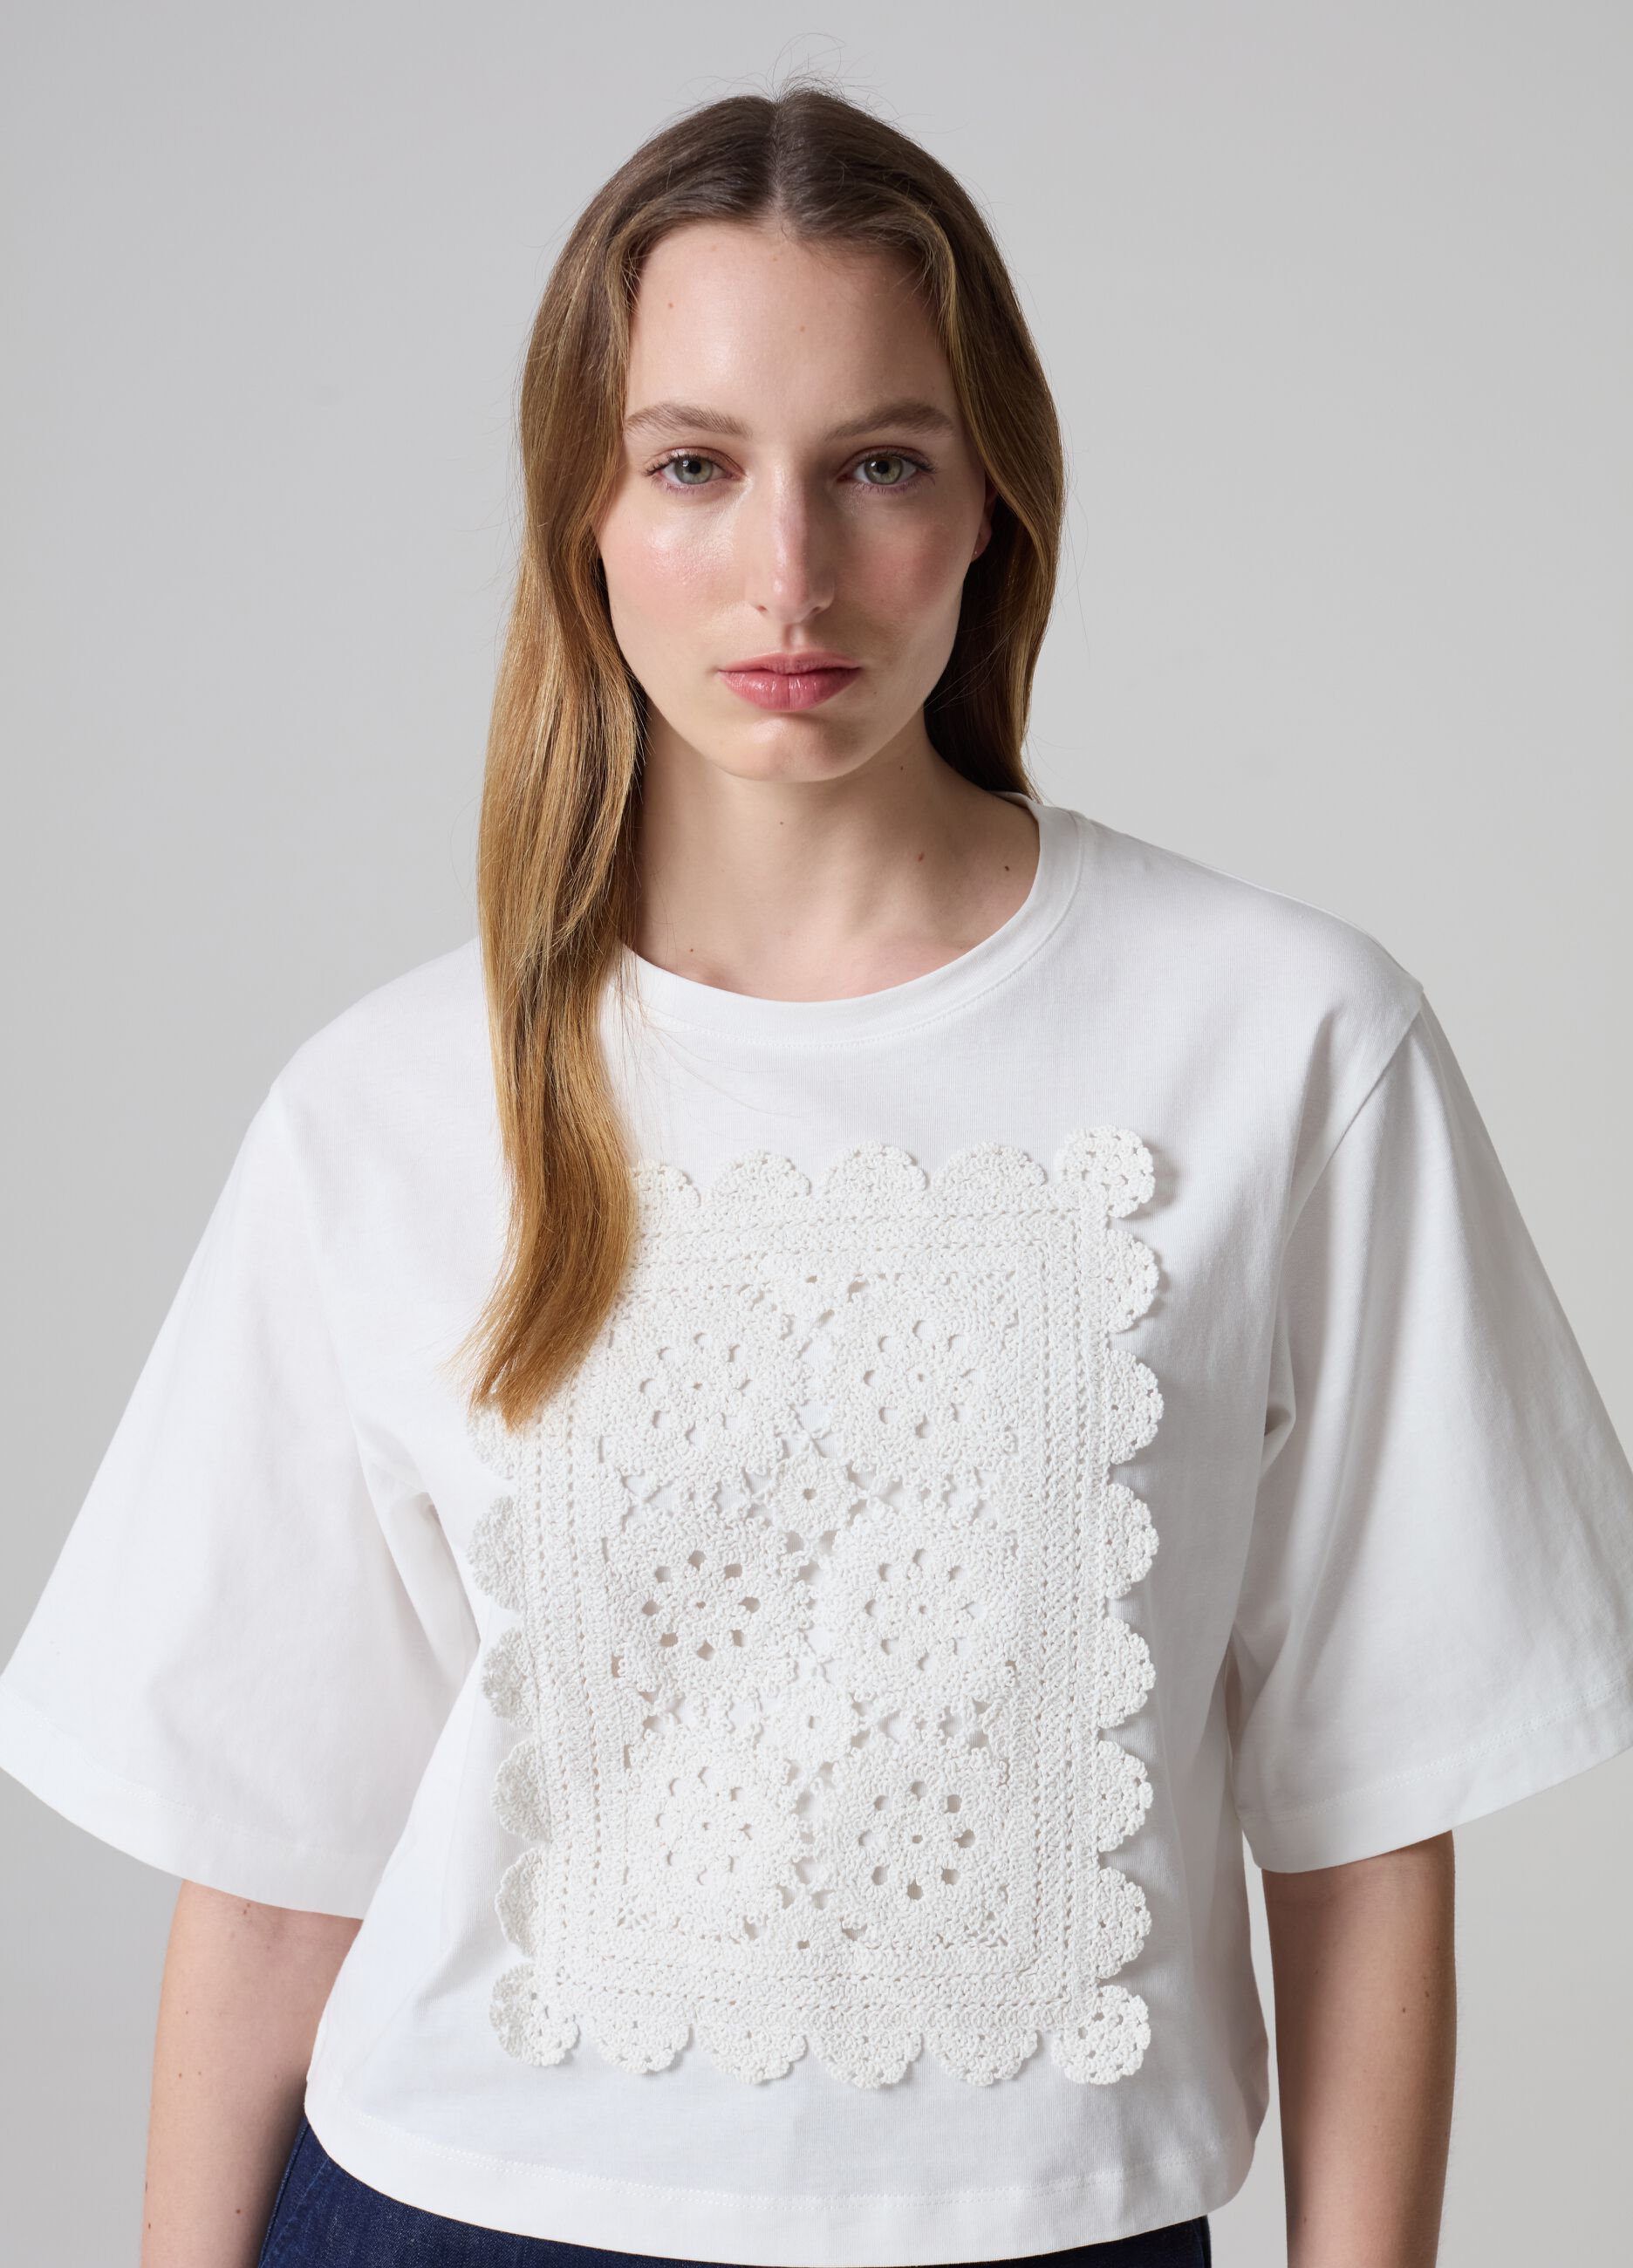 T-shirt with crochet application